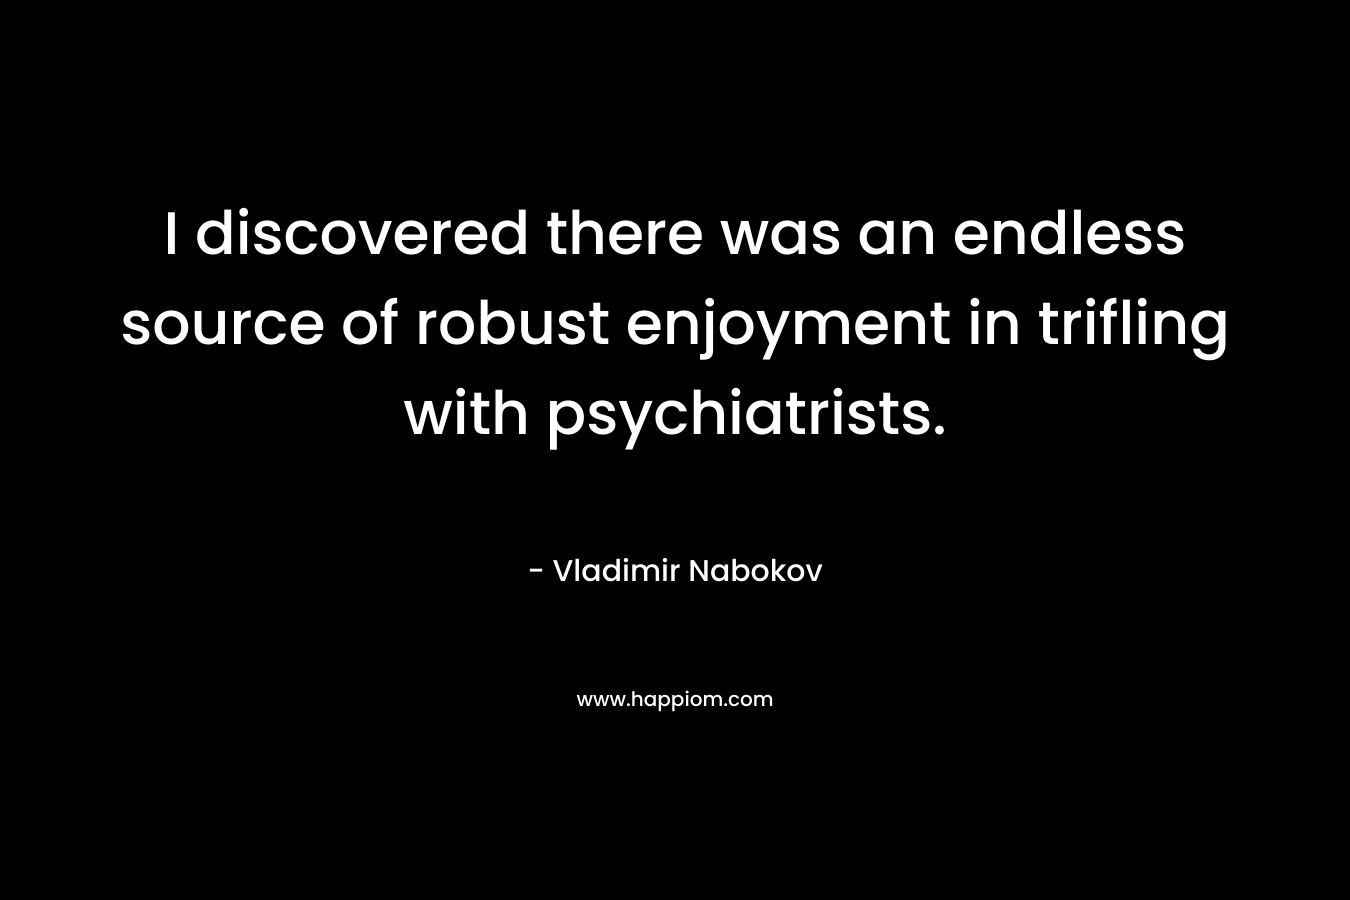 I discovered there was an endless source of robust enjoyment in trifling with psychiatrists.